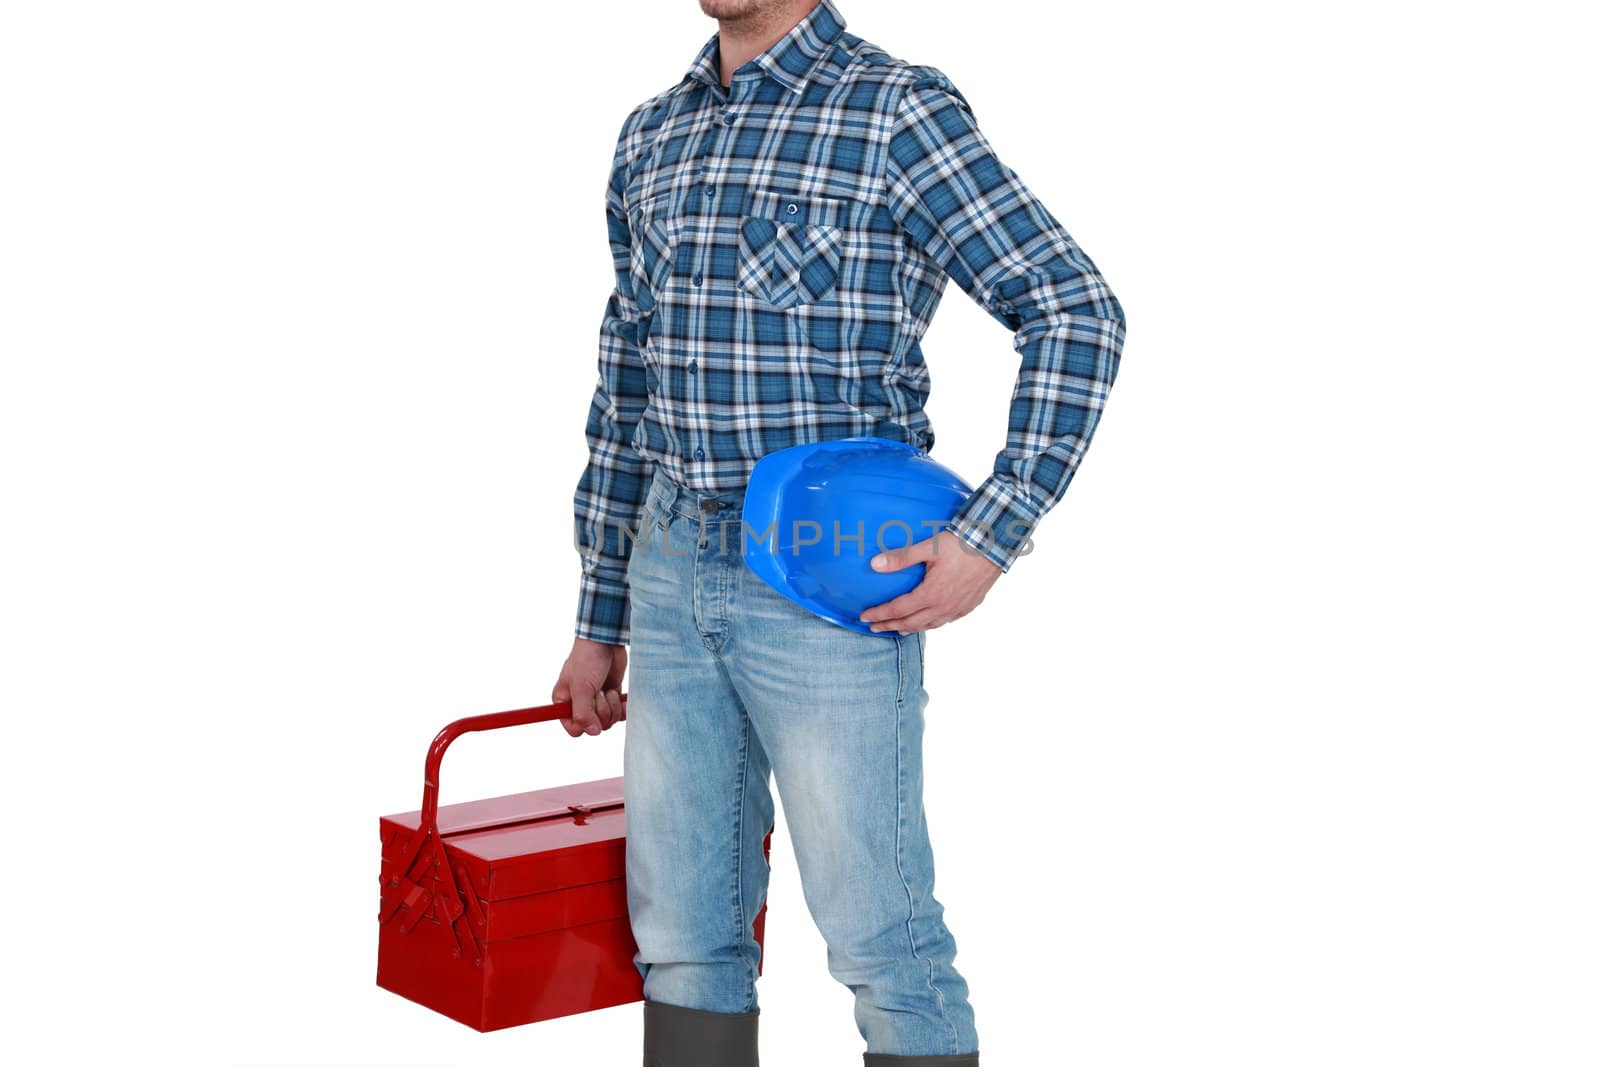 A tradesman arriving at work by phovoir